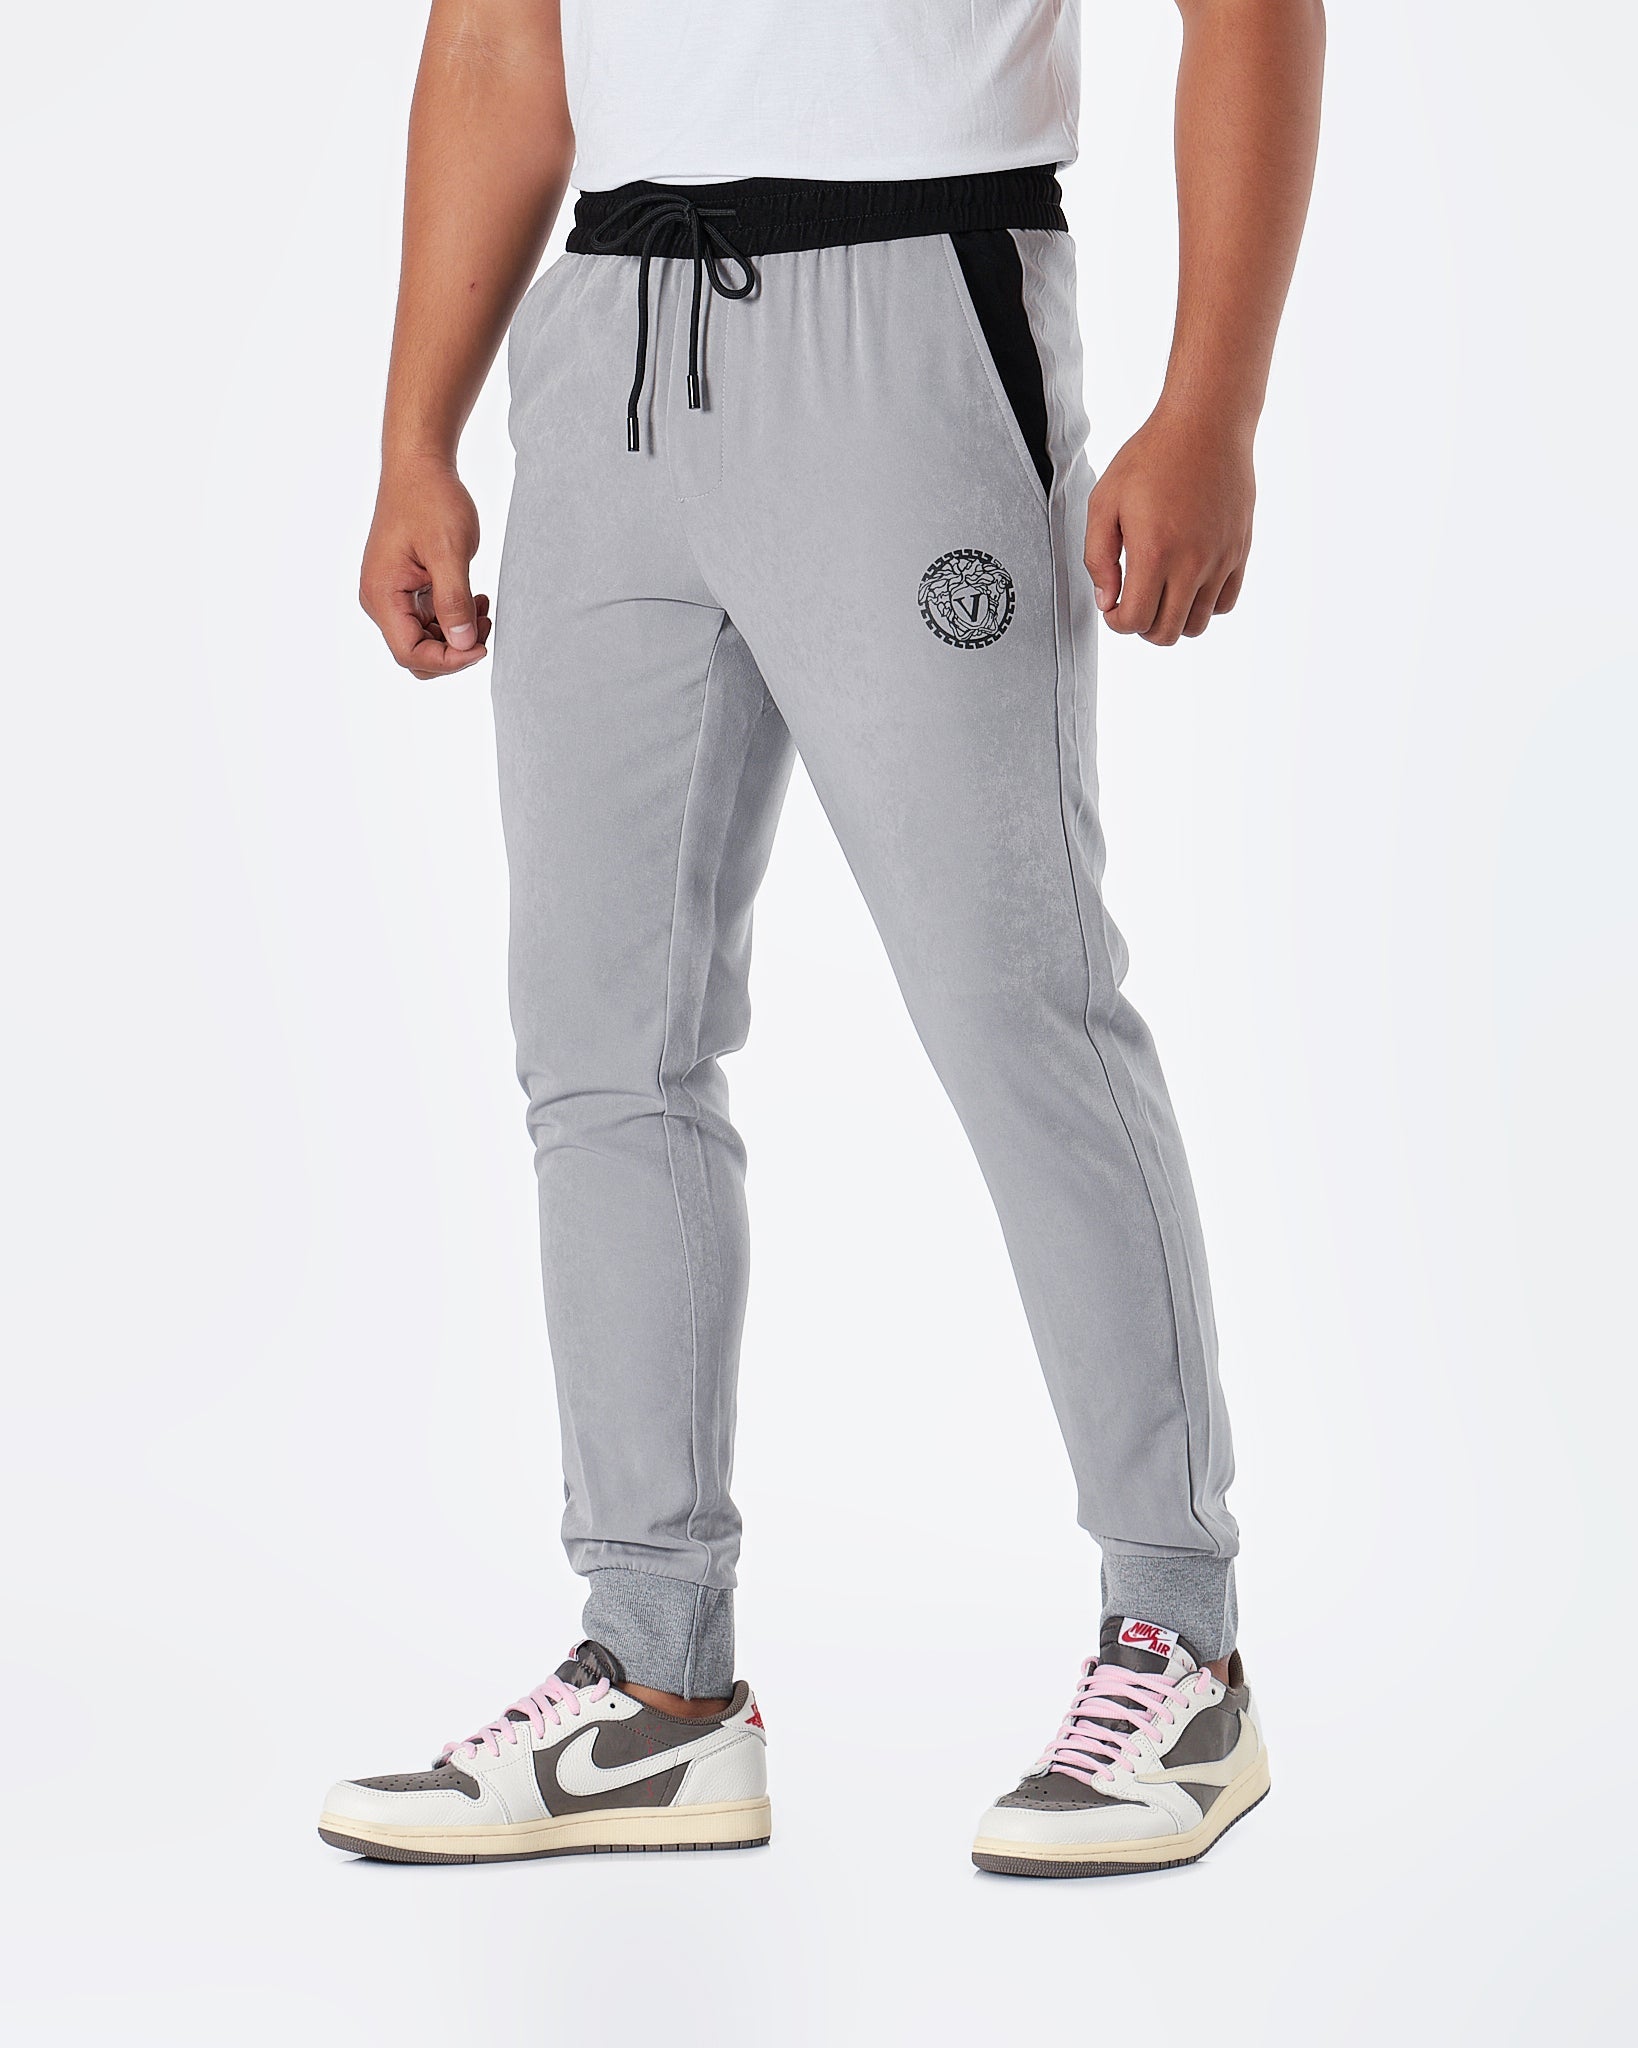 MOI OUTFIT-Medusa Logo Embroidered Men Joggers 69.90